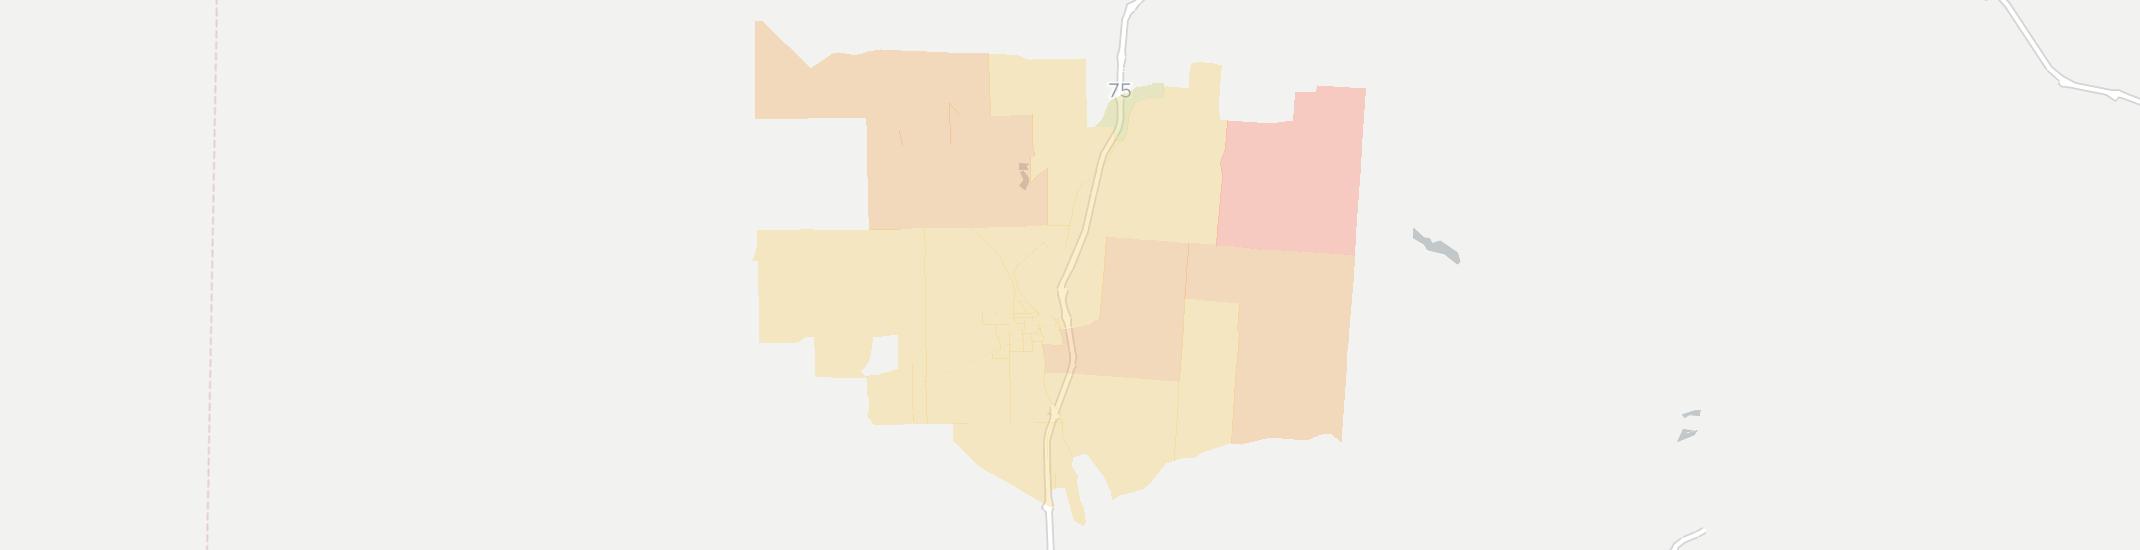 Piqua Internet Competition Map. Click for interactive map.